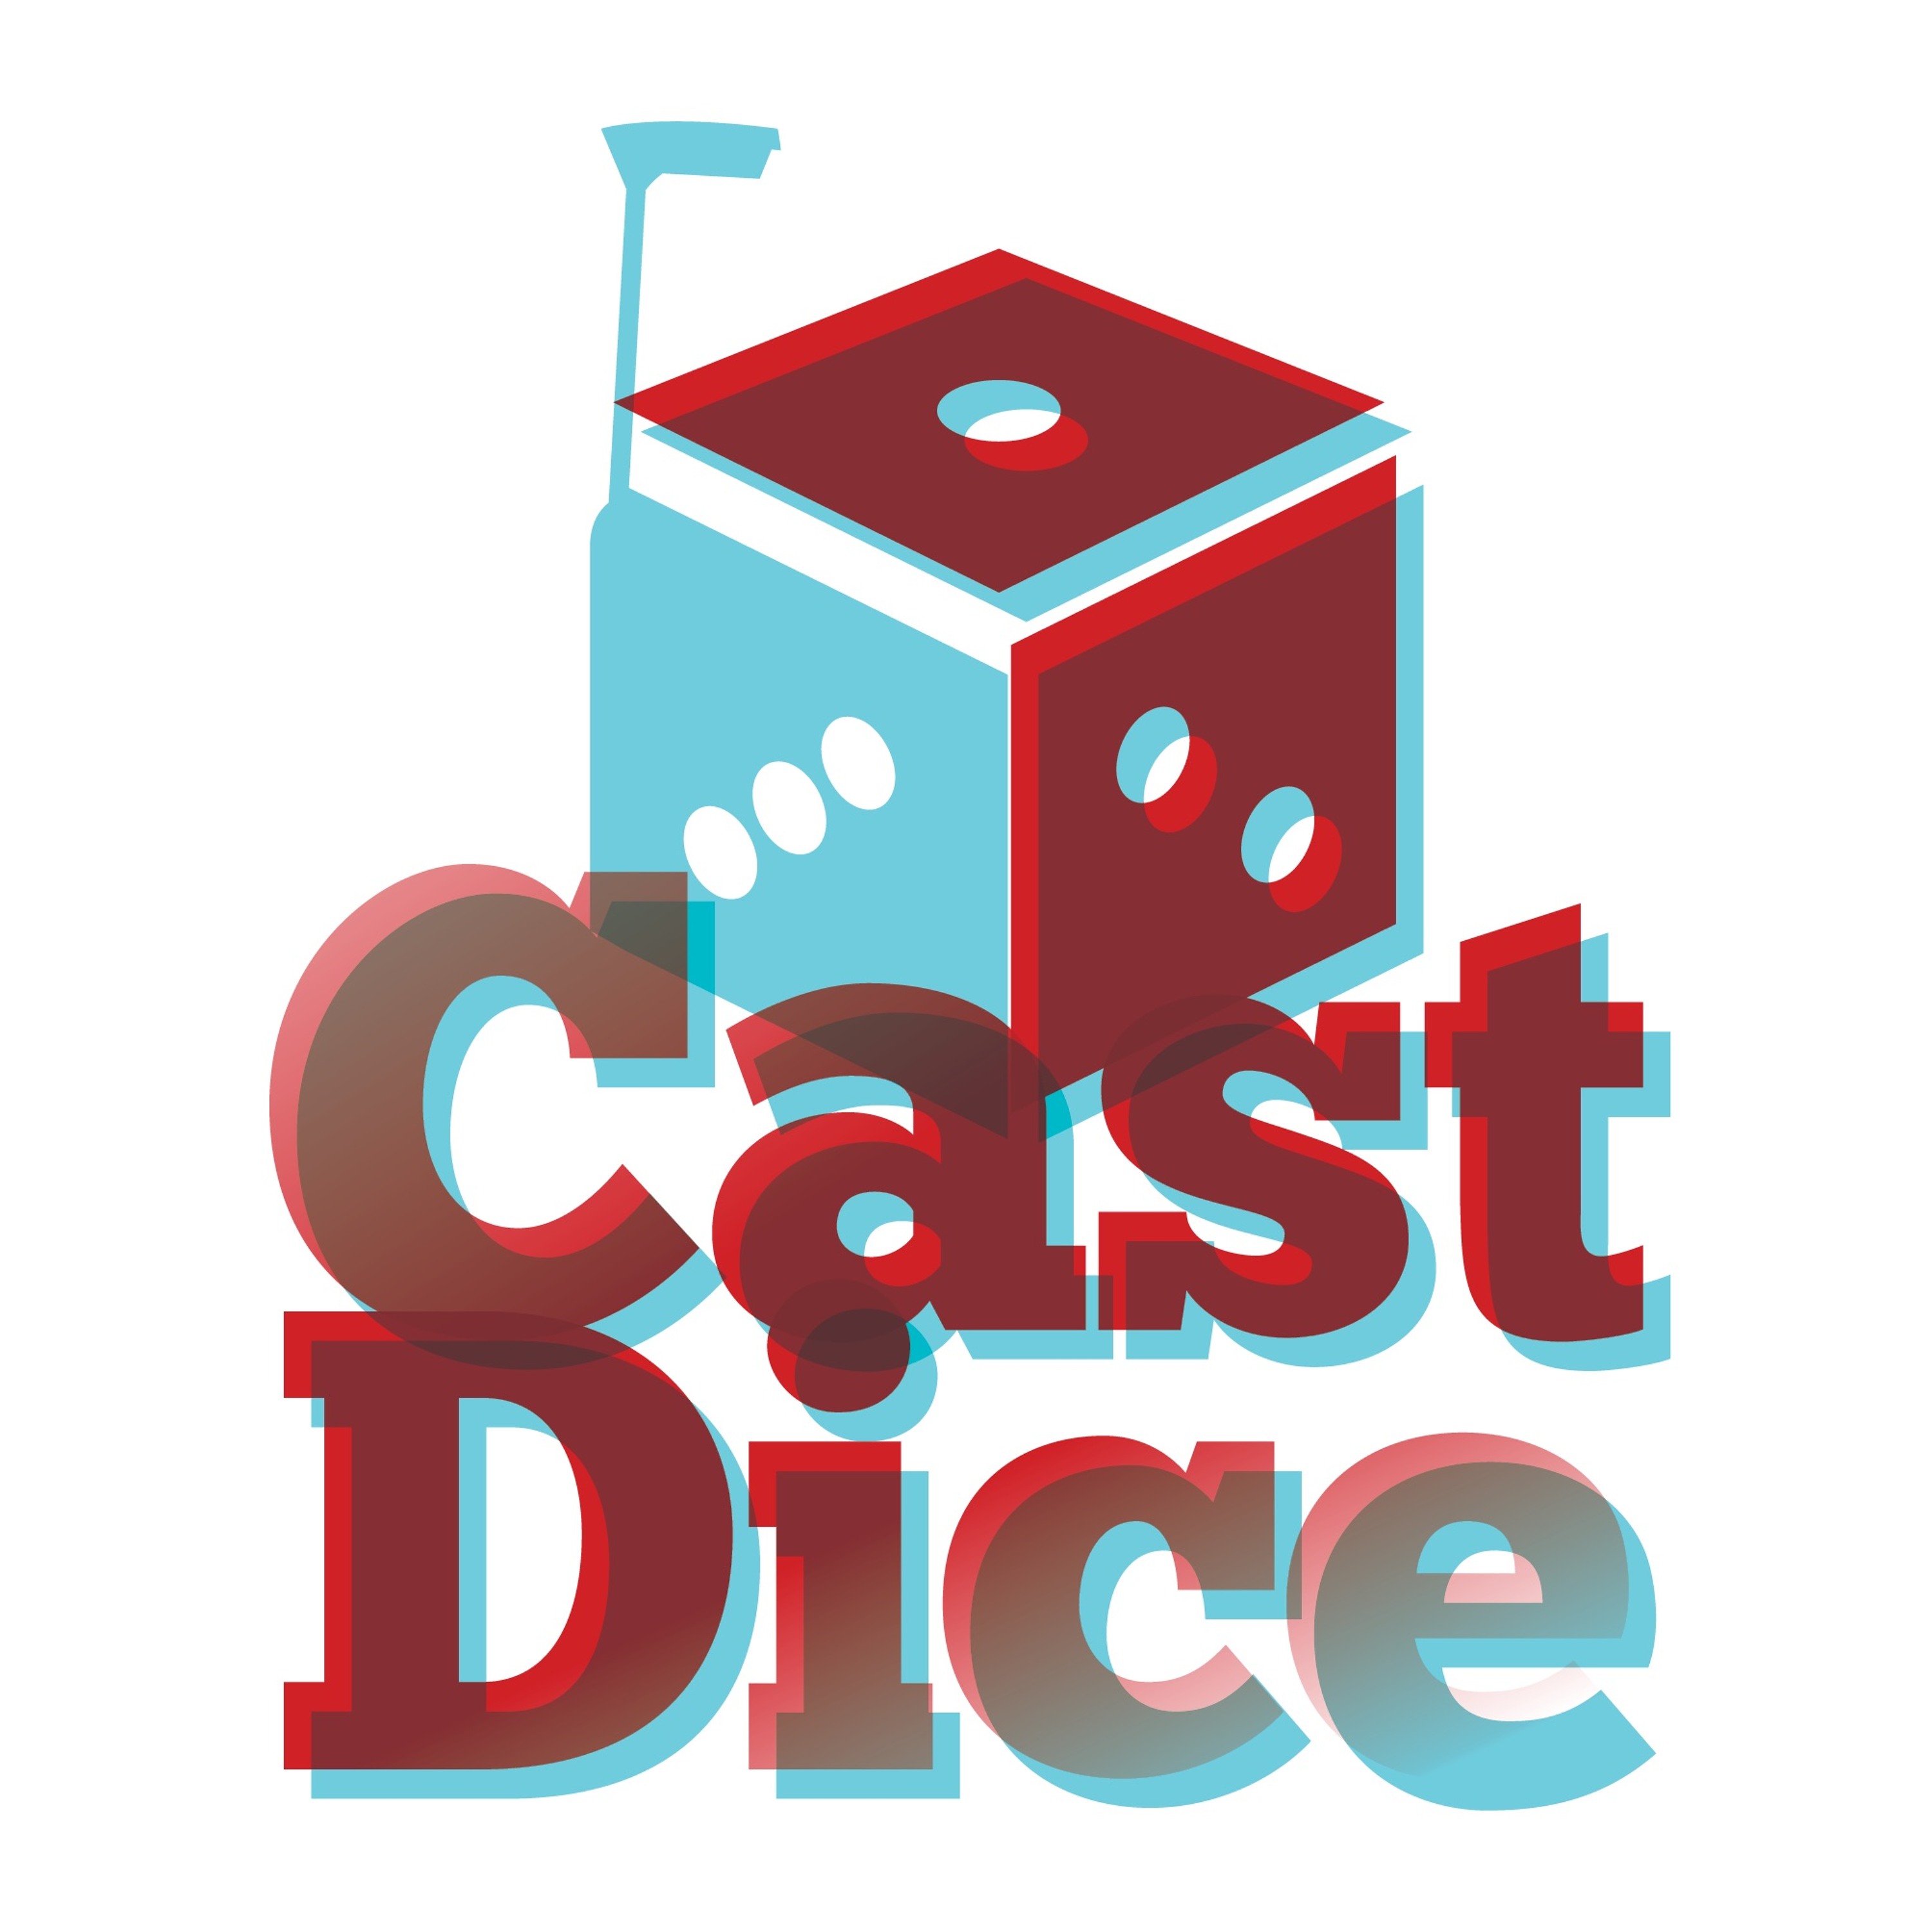 The Cast Dice Podcast, Episode 60 - Talking Shop With Rick Priestley